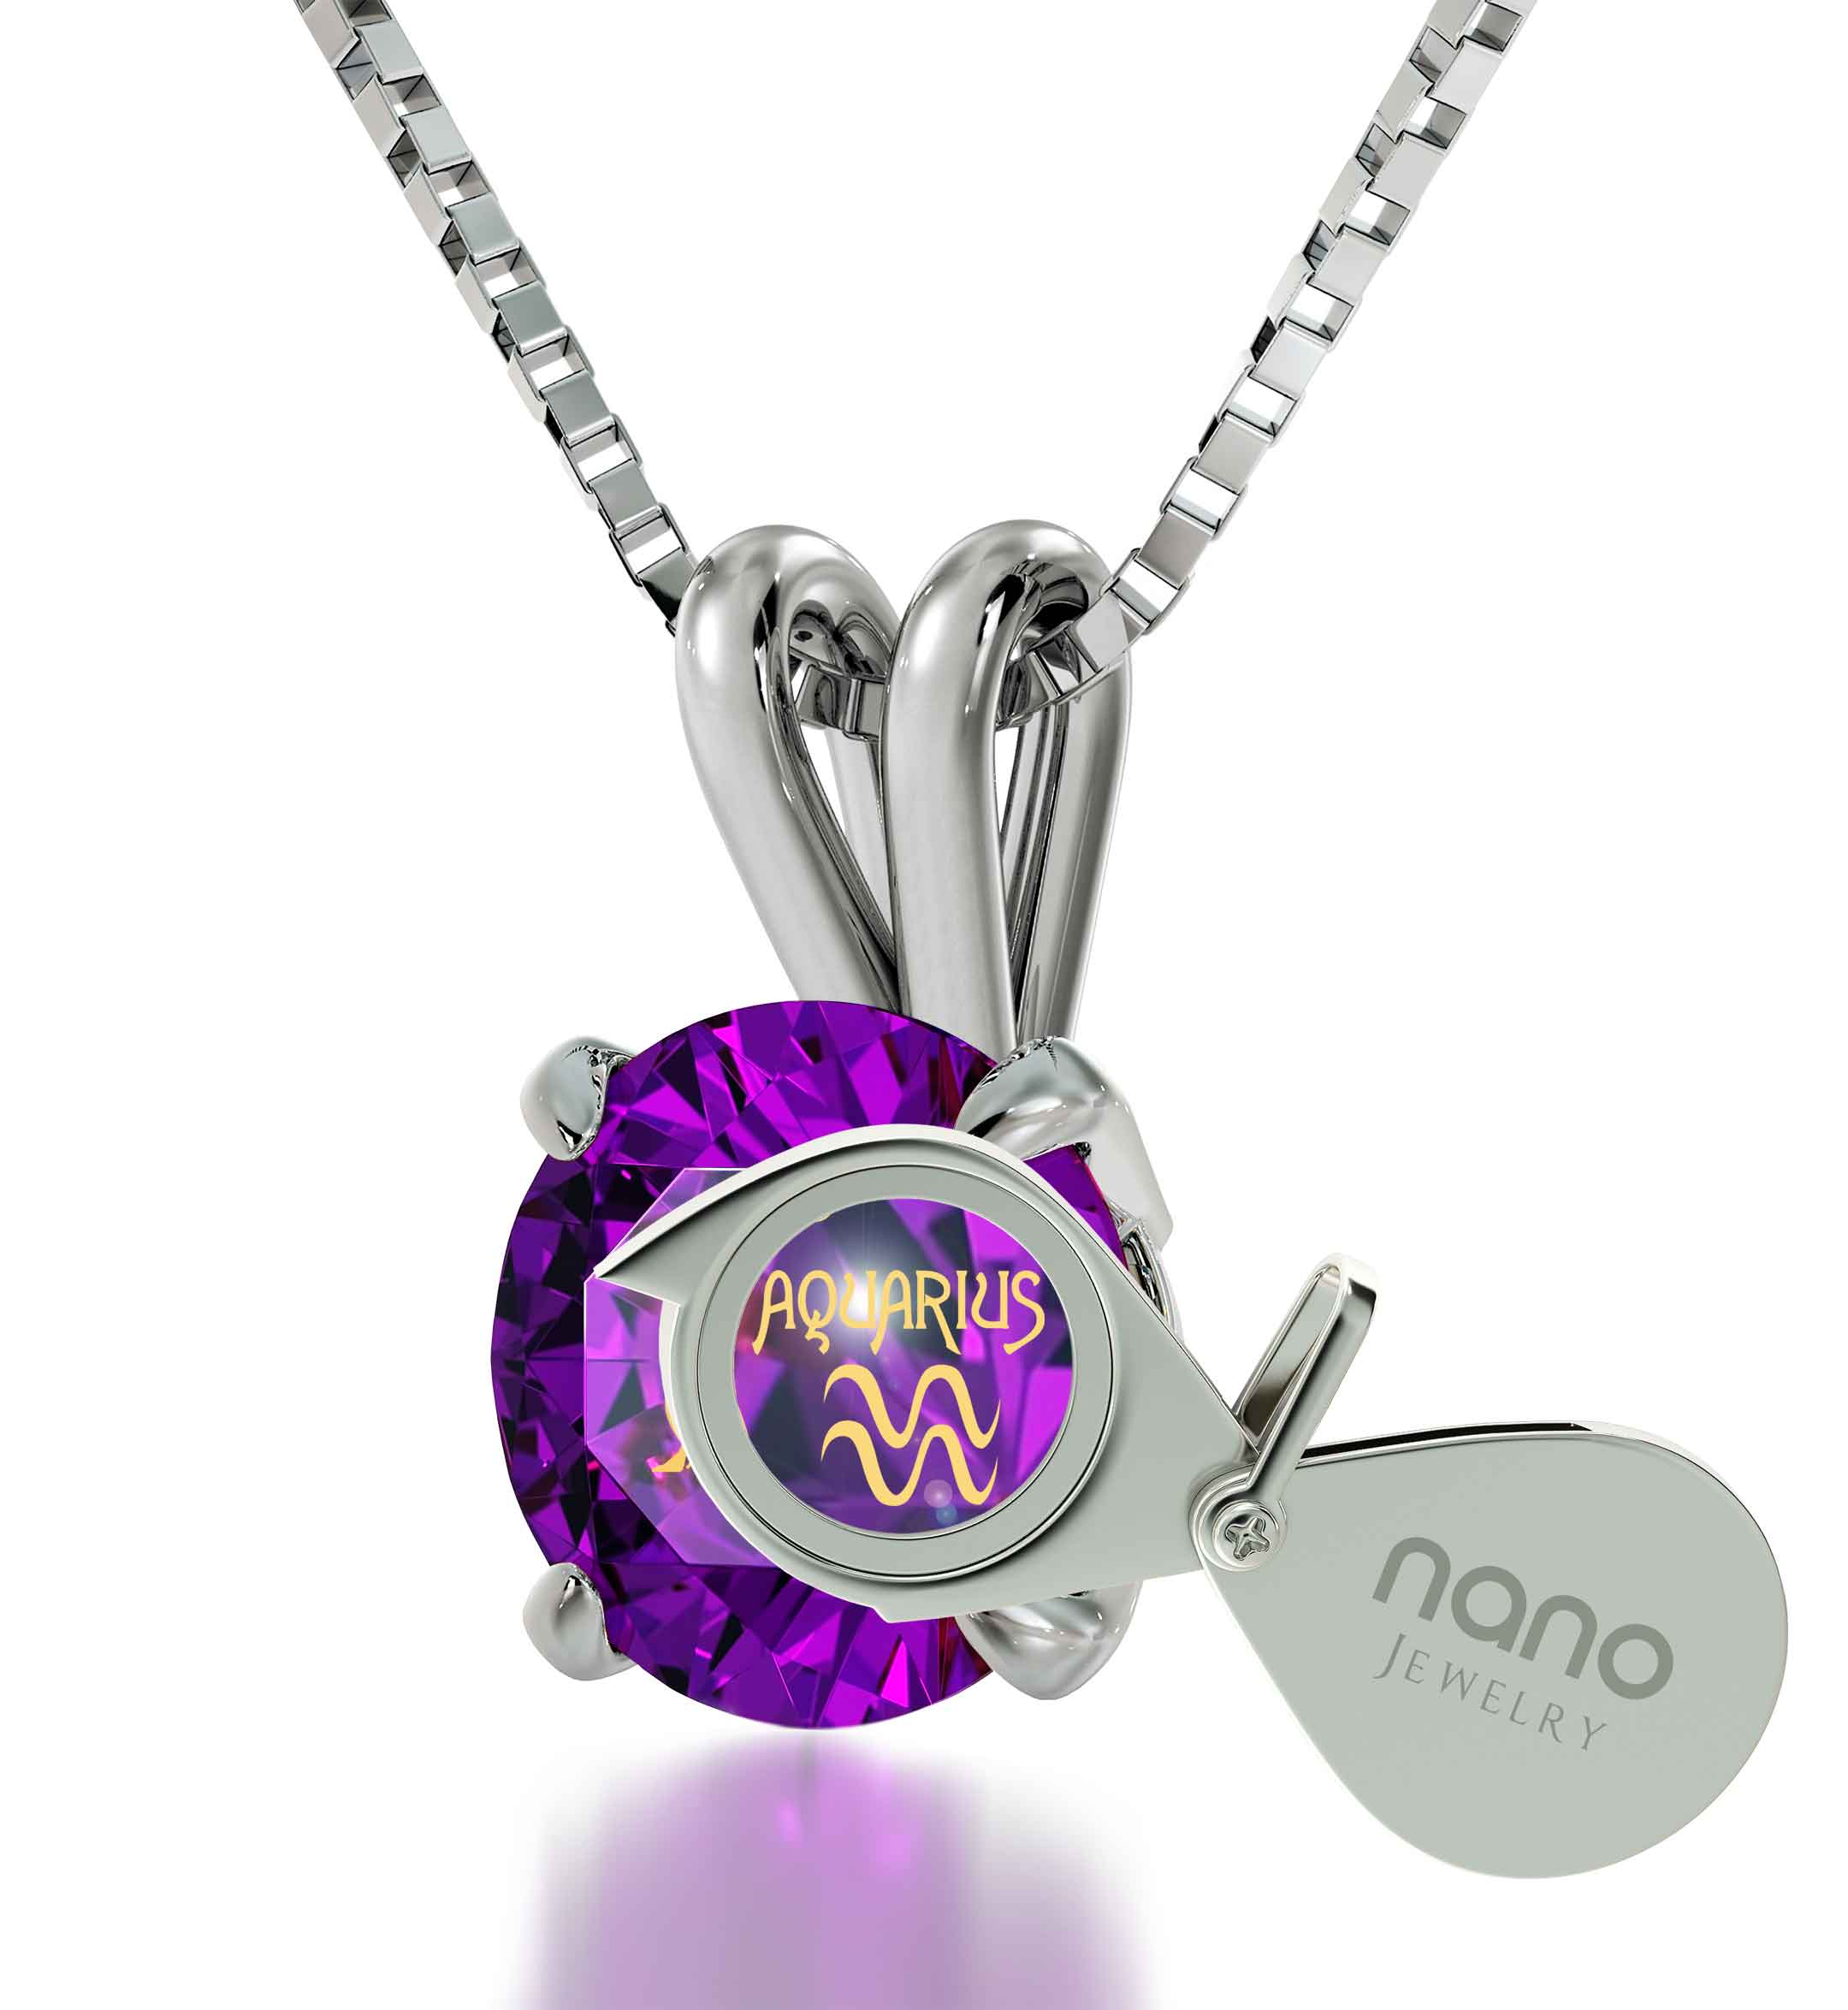 925 Sterling Silver Aquarius Necklace Zodiac Pendant 24k Gold Inscribed on Crystal ring with a large purple gem featuring an engraved Aquarius pendant in a geometric design.